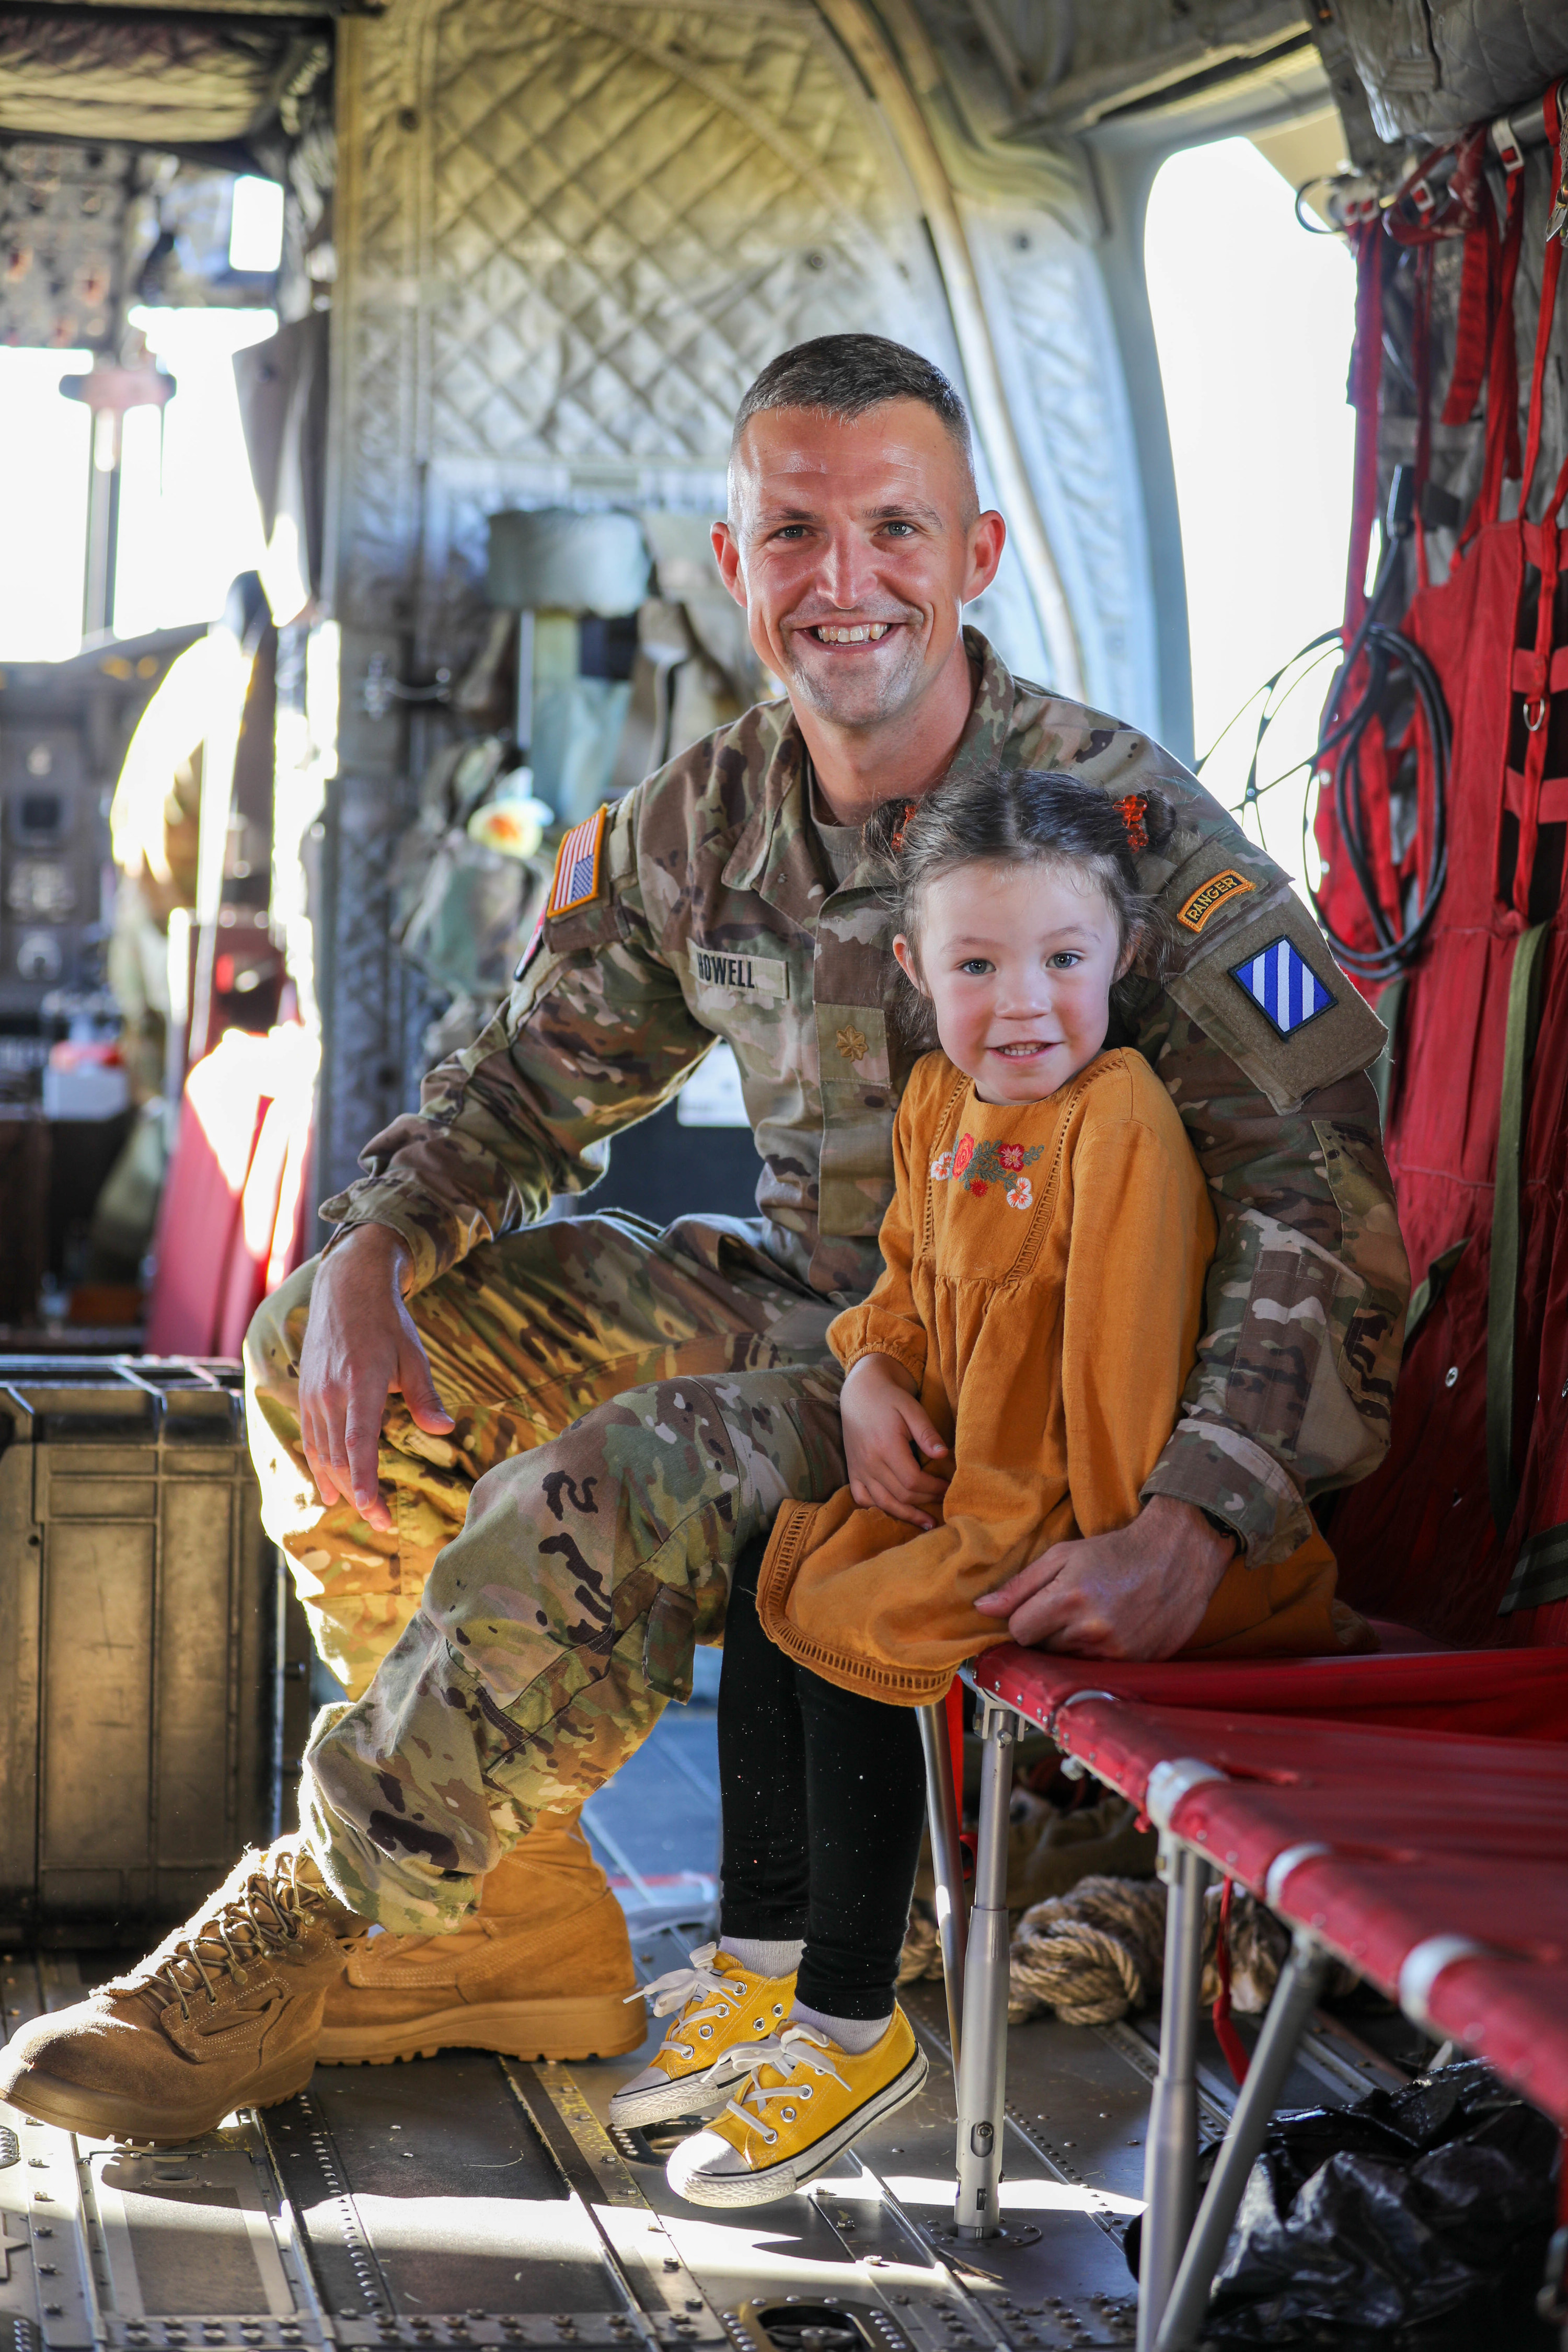 A US Army member sits inside an aircraft with his young daughter